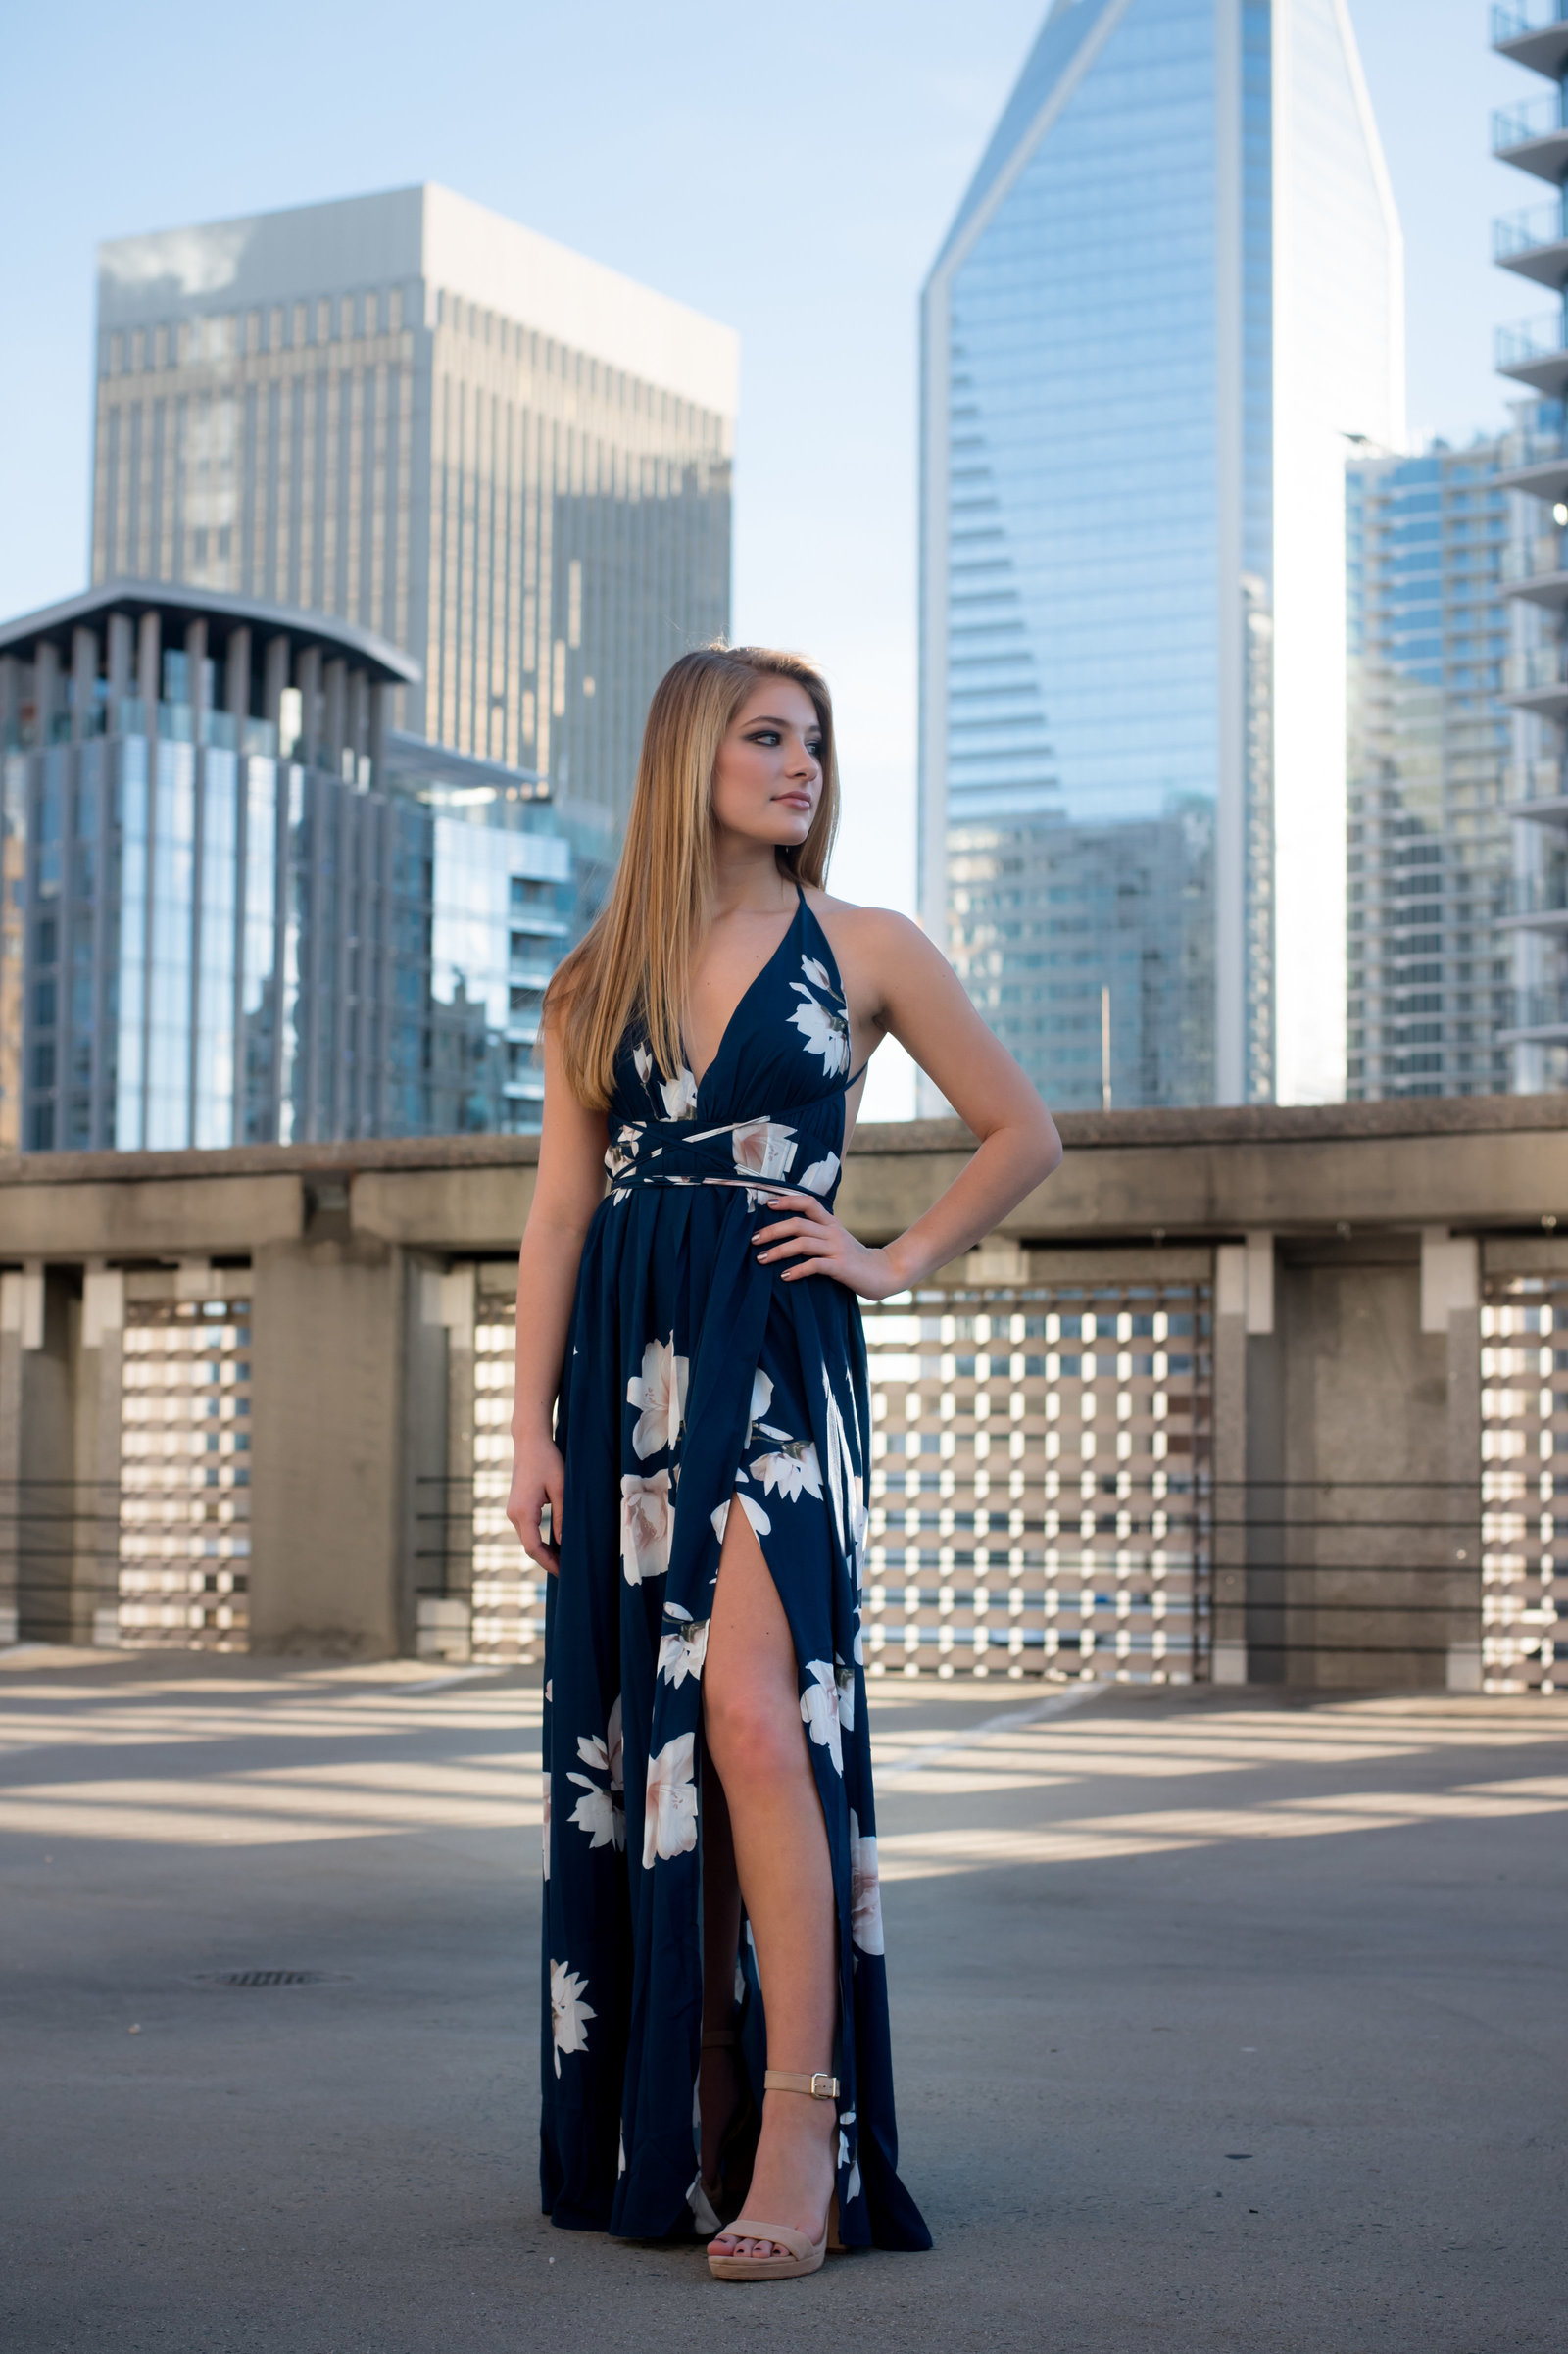 05-Natural-Bloom-Photography-uptown-charlotte-portrait-4981